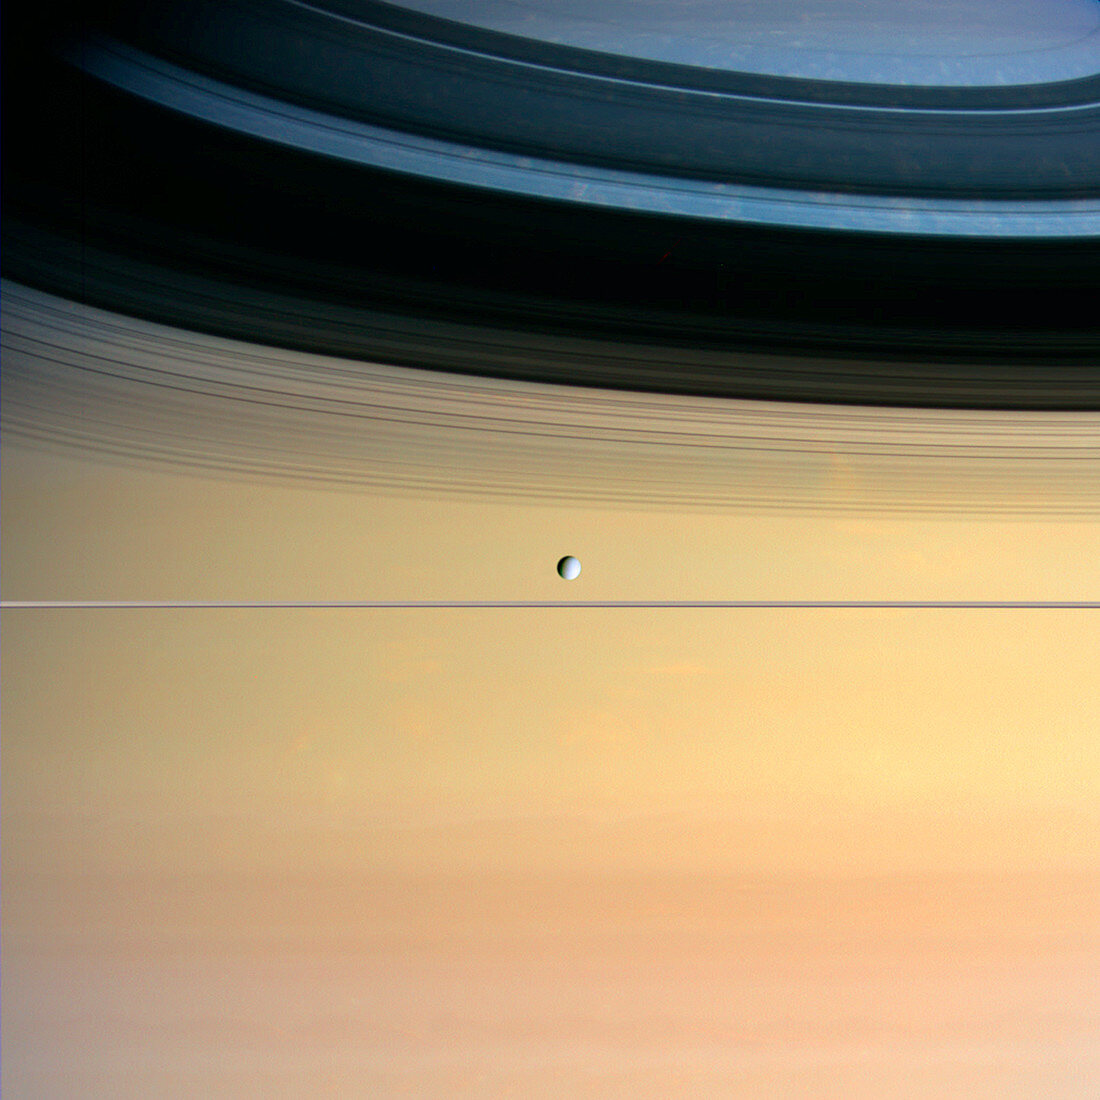 Dione and ring shadows on Saturn,Cassini